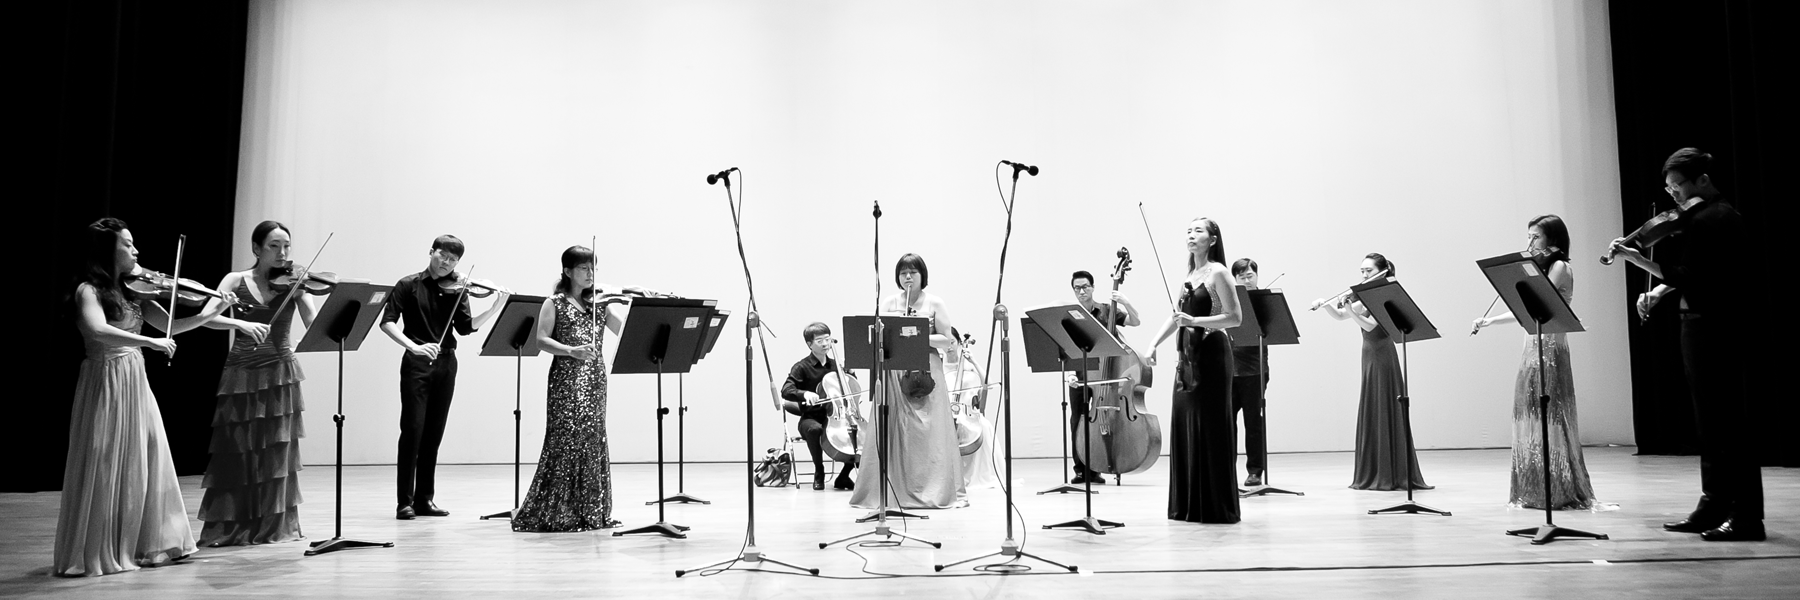 M&P Chamber Orchestra